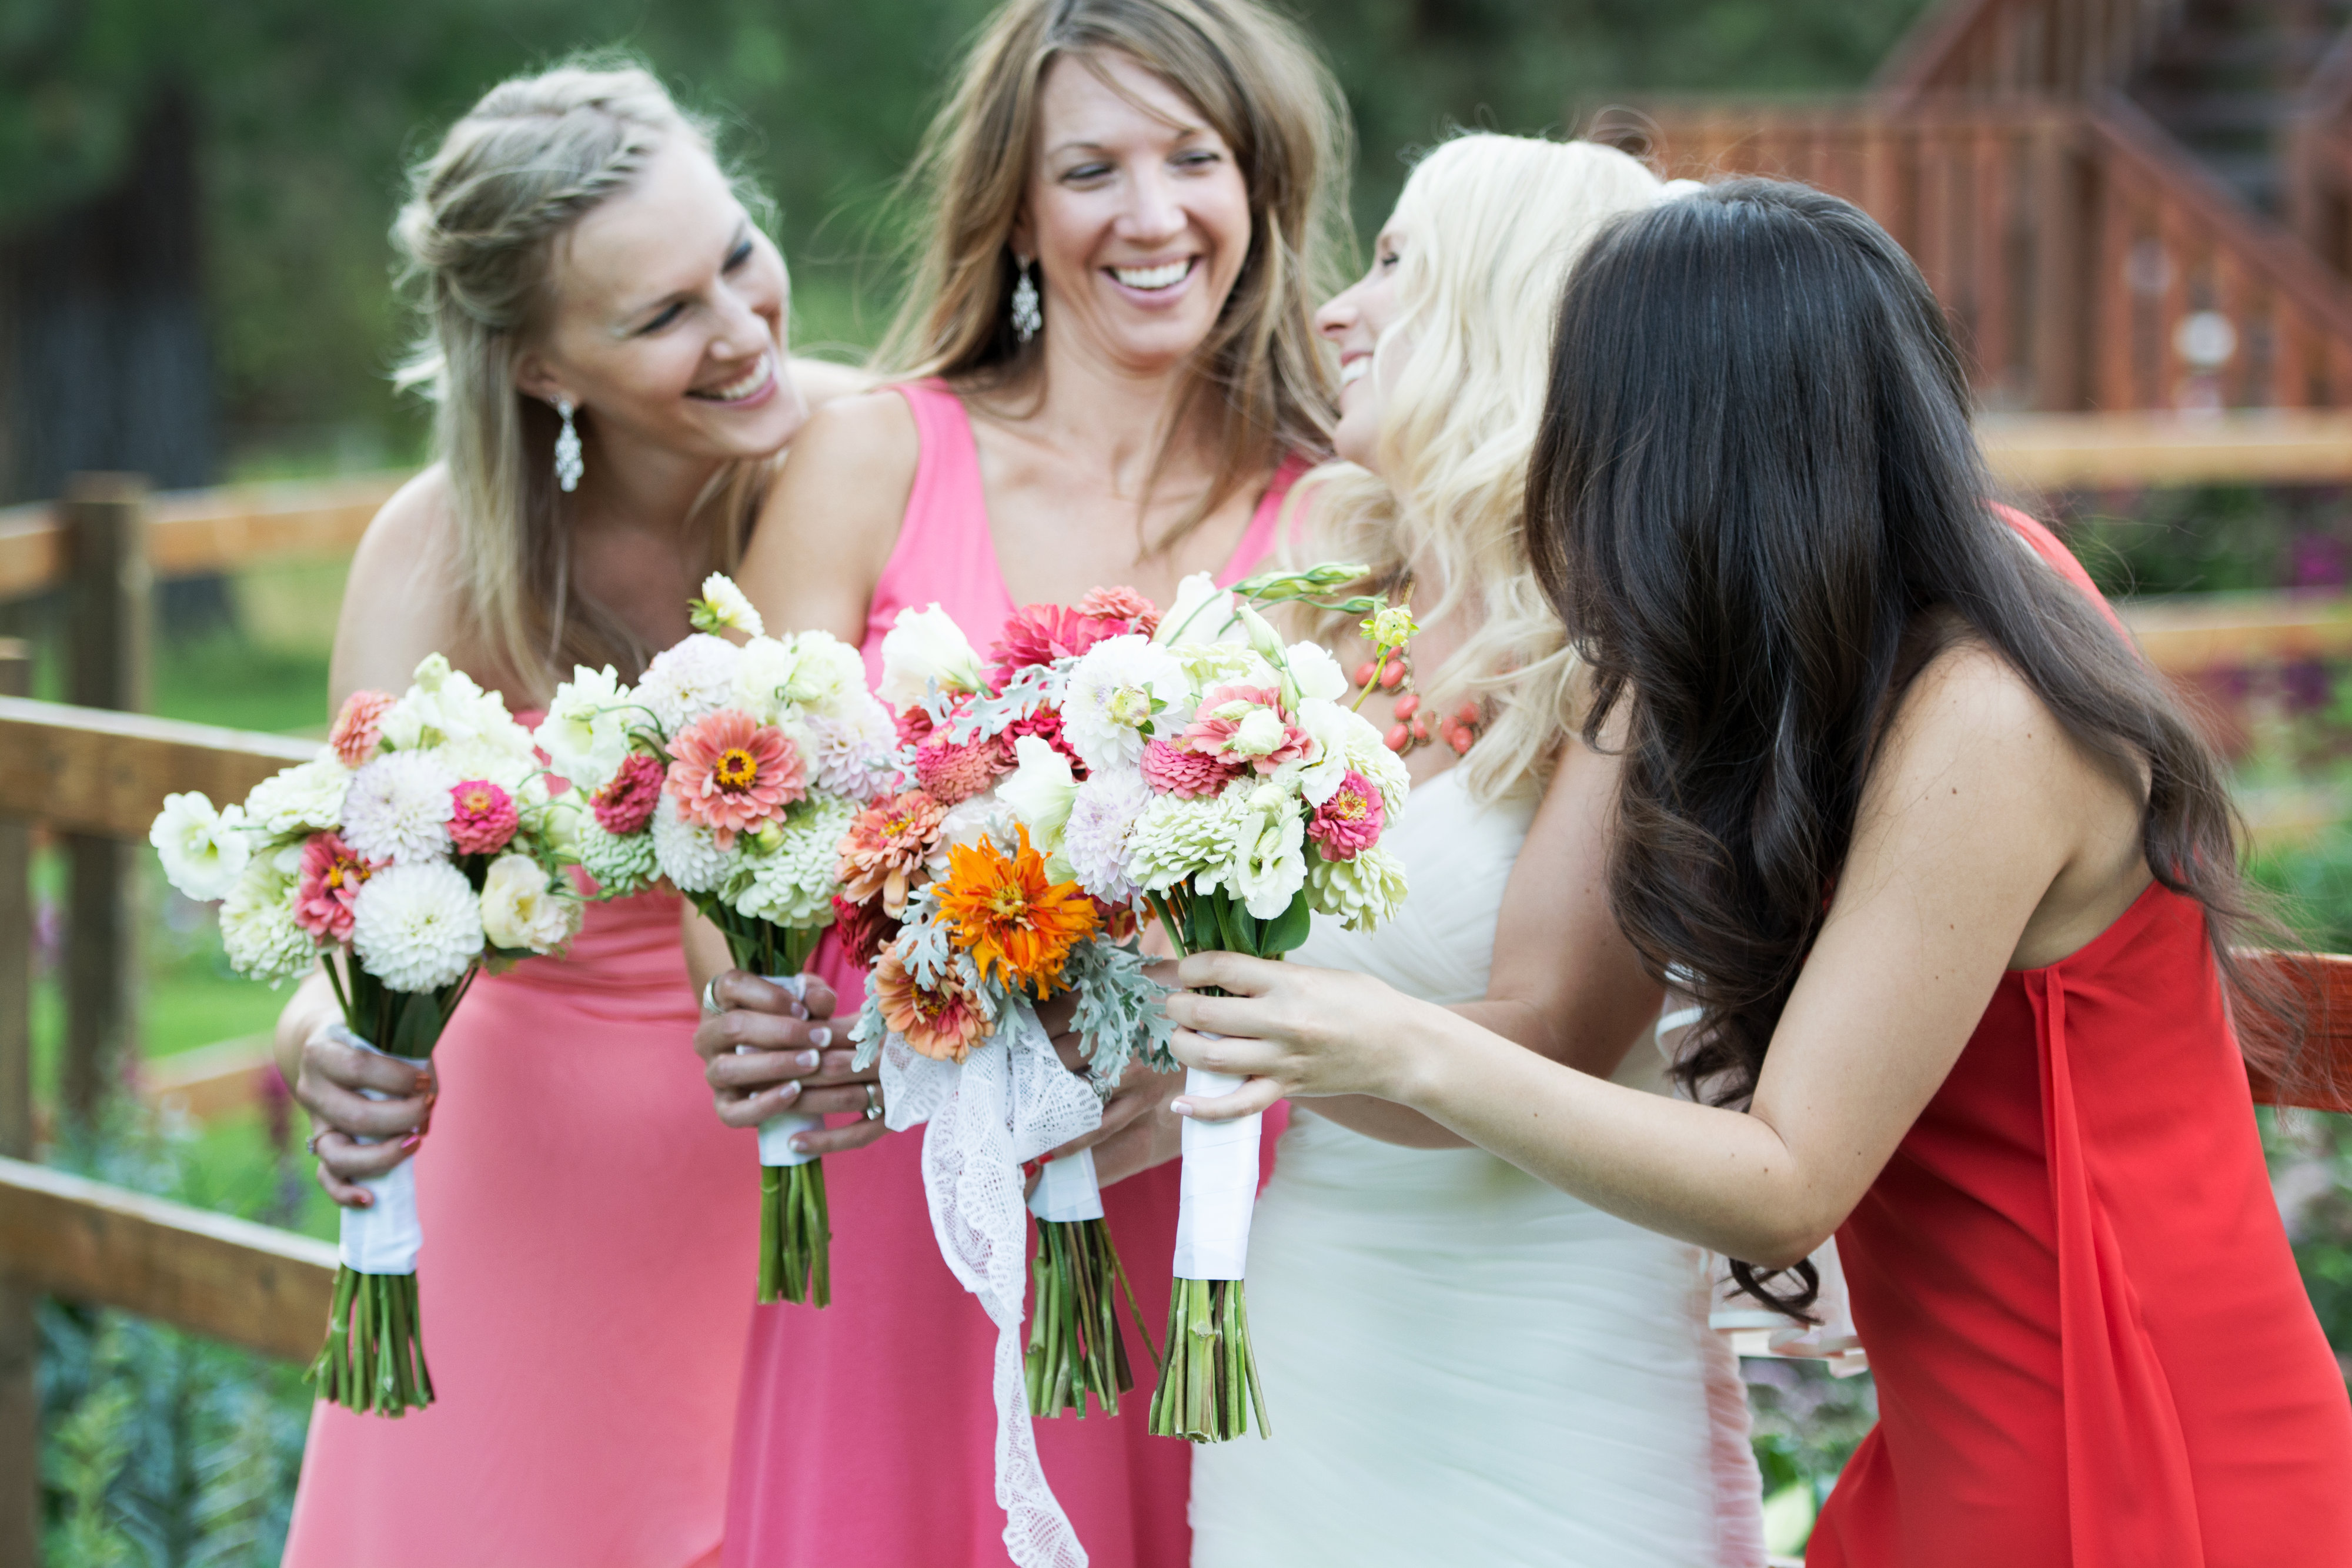 How to choose your wedding colors Summer wedding colors